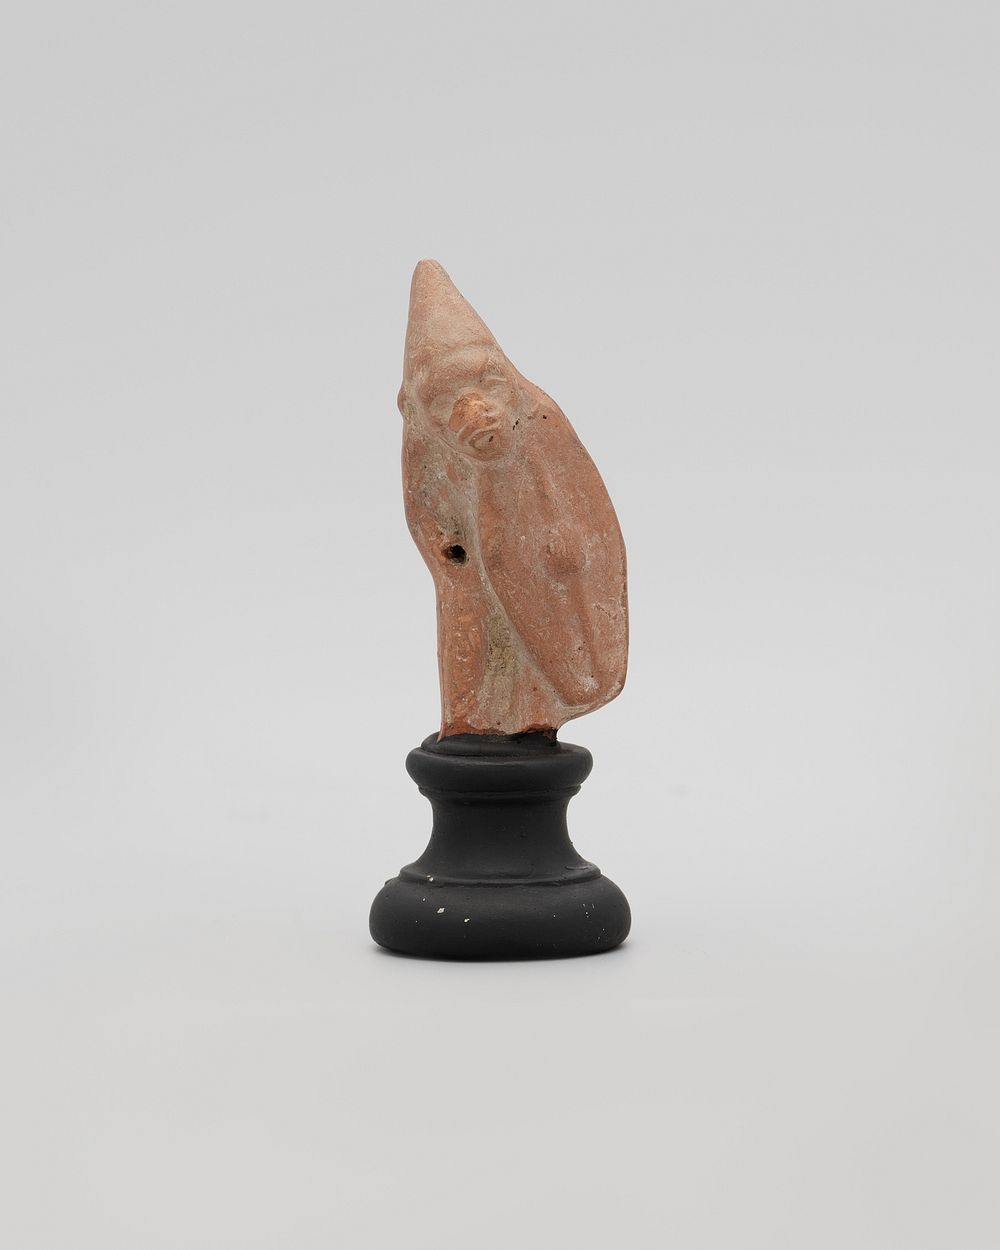 Fragmentary Figurine of a Monkey by Ancient Greek